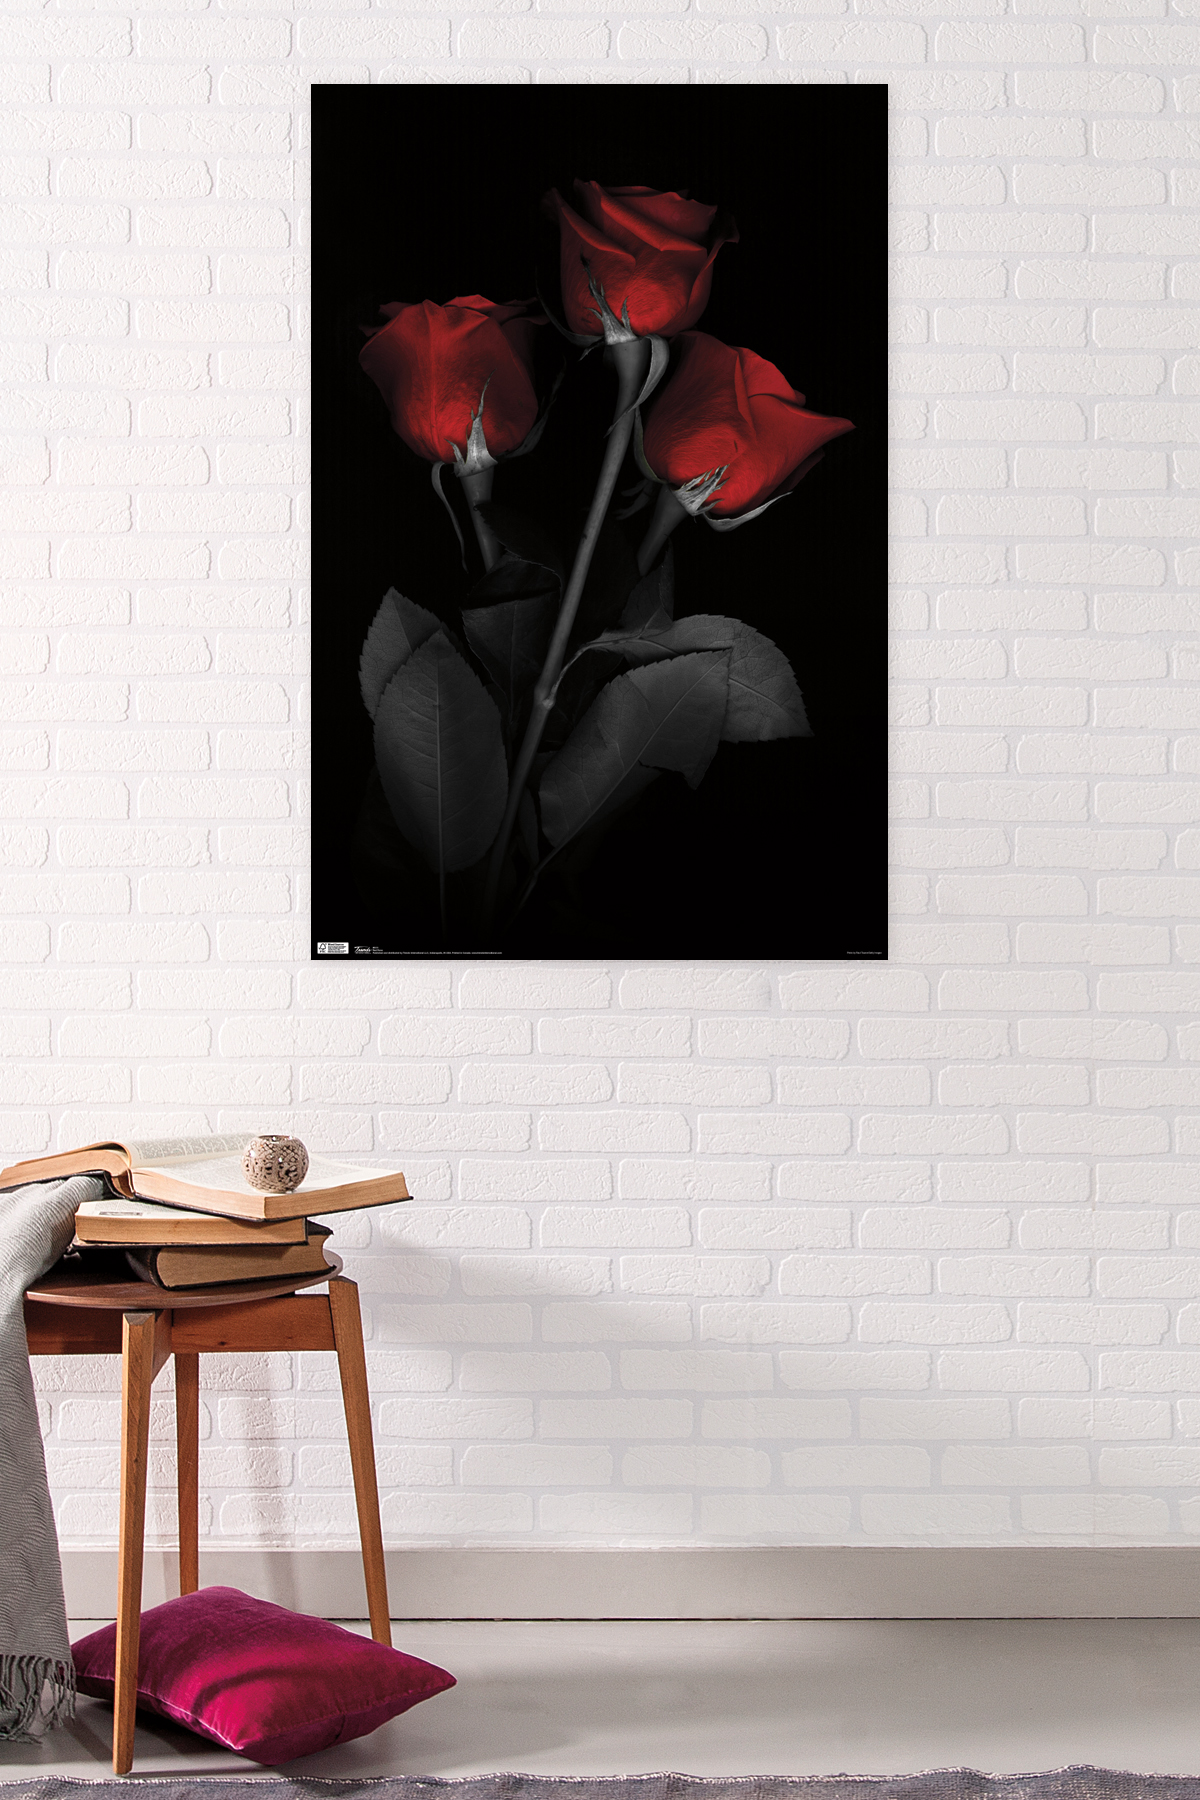 Red Rose Wall Poster, 22.375" x 34" - image 2 of 2